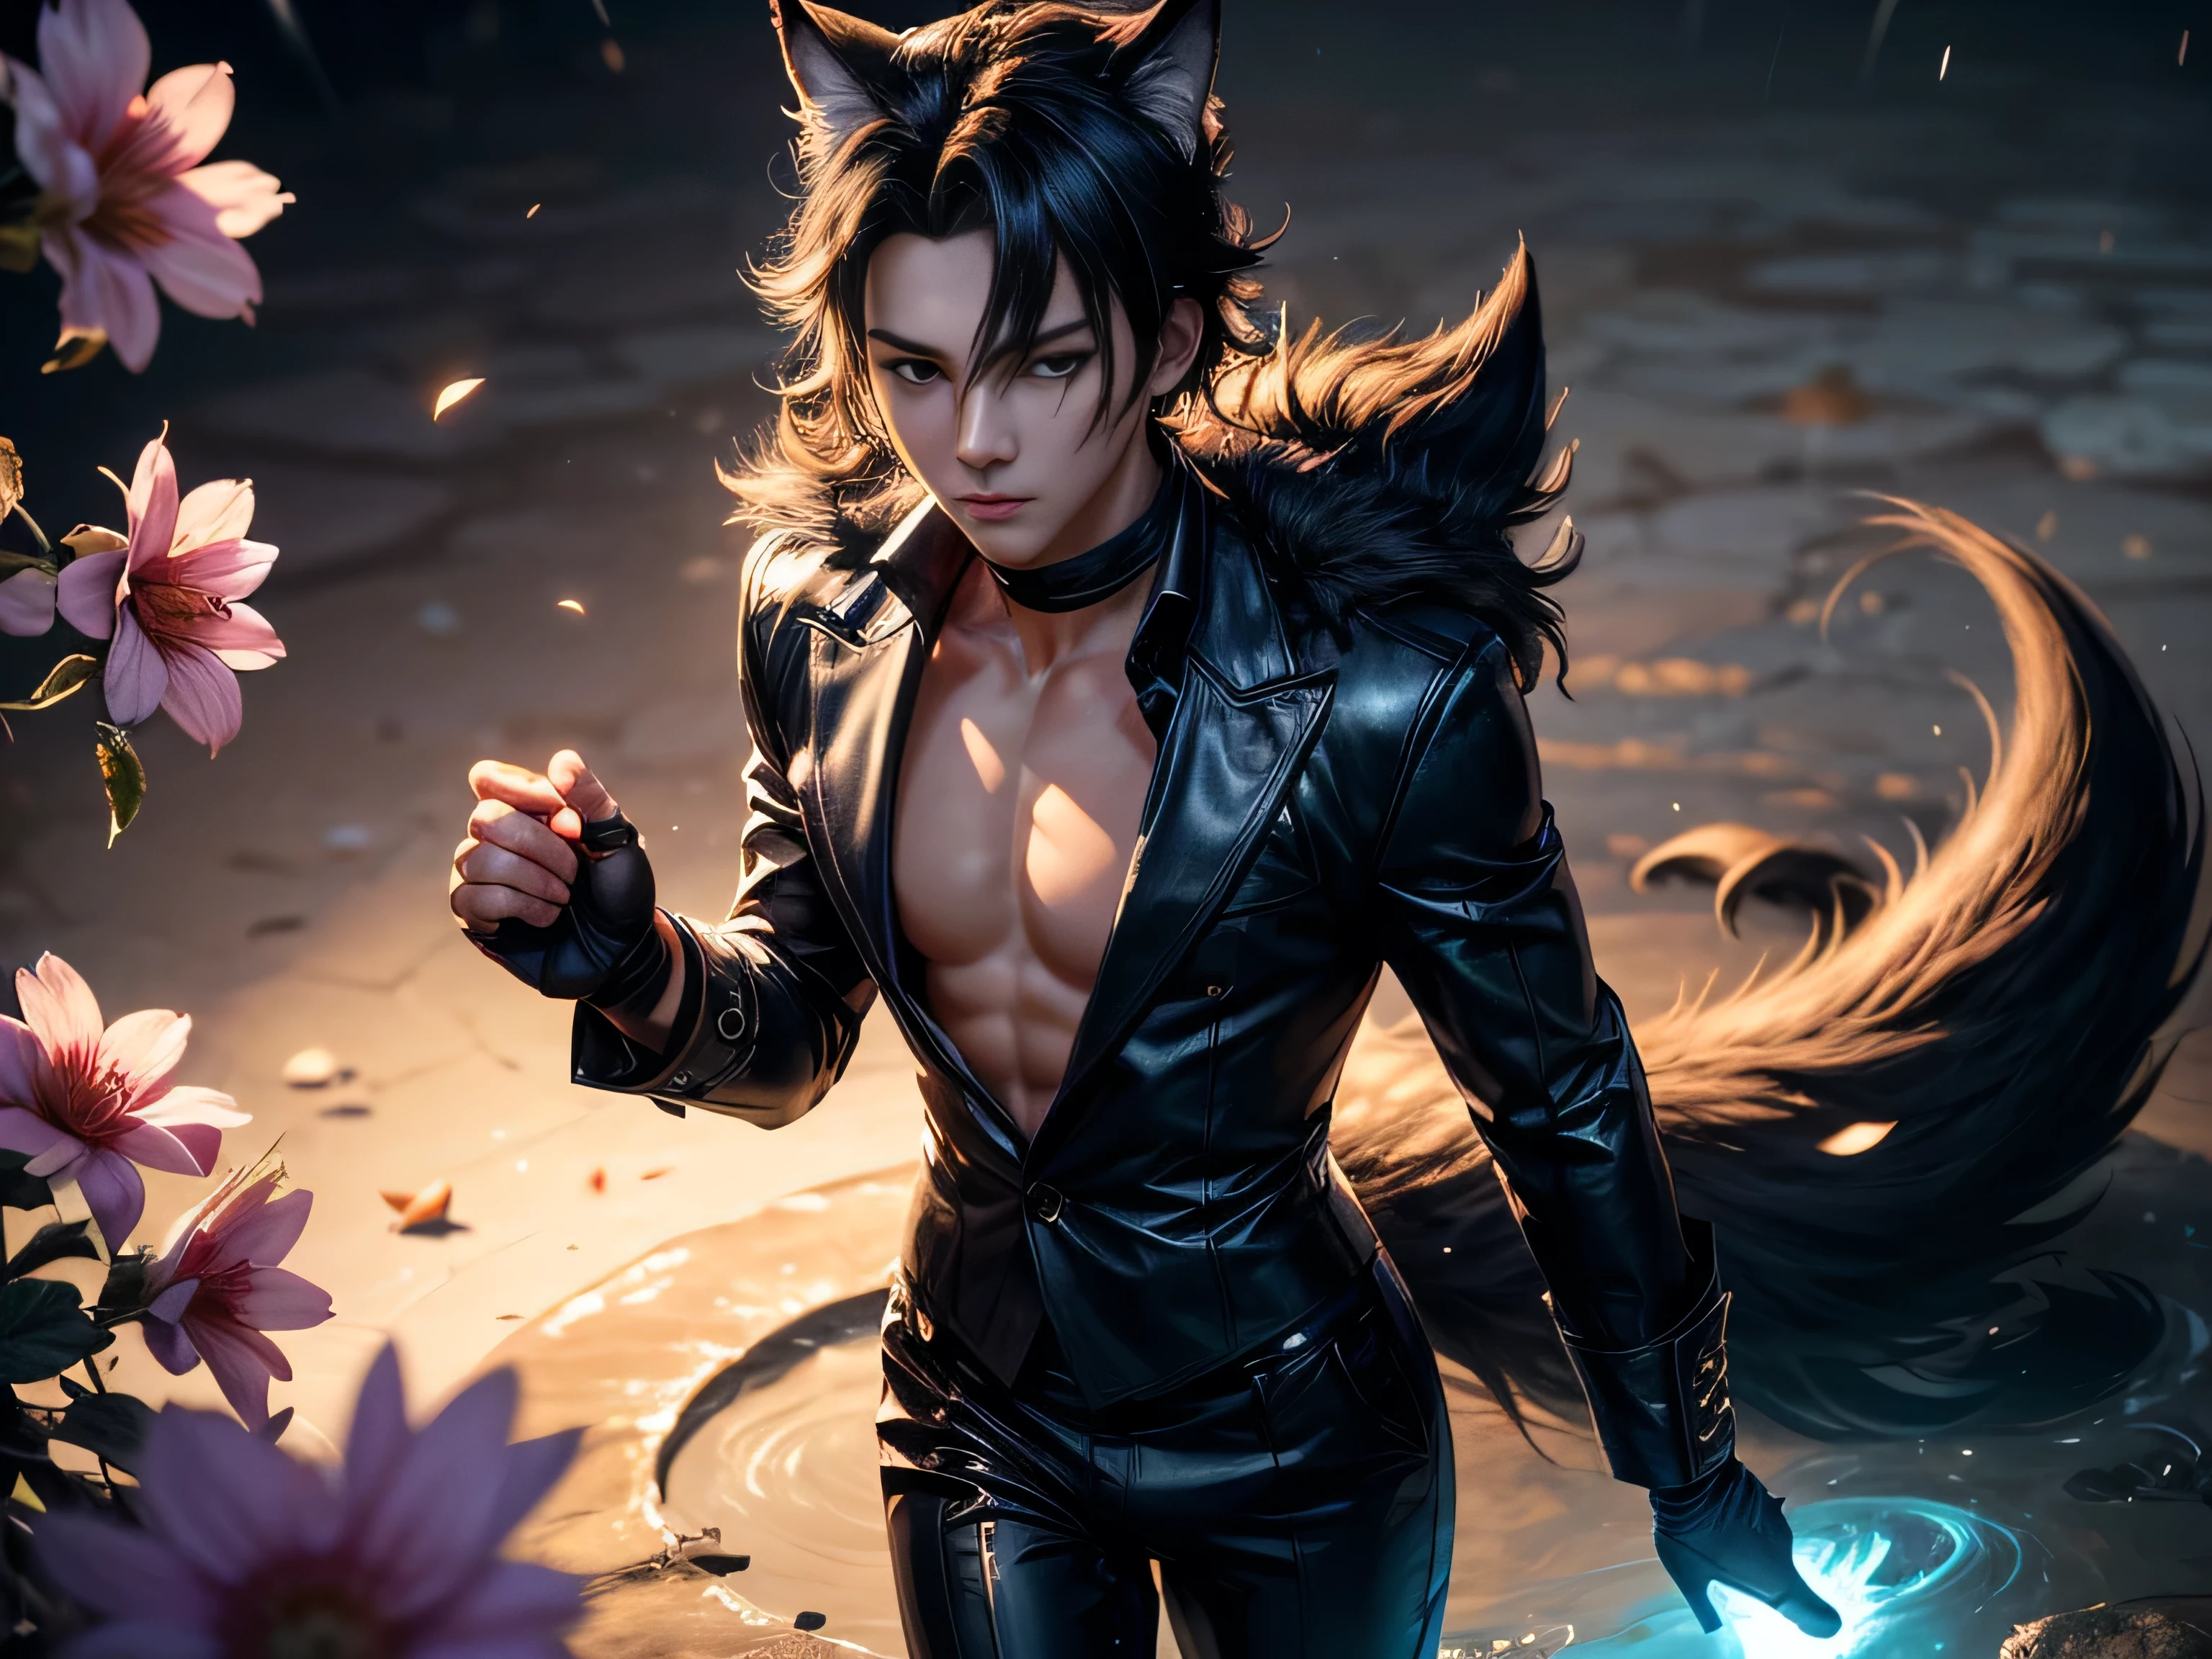 (Best Quality, 8K, Masterpiece, HDR, Soft Lighting, Picture Perfect, Realistic, Vivid), Nine Tails of a Black Fox (1.0), Tail of a Black Fox (1.0), Nine-Tailed Fox, Guy Fox with Black Hair and Blue Suit Sexy open leather suit, naked torso with developed body, beautiful fantasy anime, very handsome and cute fox guy, pink flower rain, background blur, anime fantasy, Gouves style work, realistic: 1.37, top view, lying in pink flowers, horizontal view, (ultra high quality fantasy art), masterpiece, male model, ultra high quality male character design, anime art with 8k development, realistic anime art, highest quality wallpaper illustrations, complex ultra high quality accurate male characters faces, high quality design and accurate physics (super high quality fantasy style)) art, dark fantasy)) Style), masterpieces, super high-quality characters, anime resolution - 8K, realistic anime art, wallpapers with the highest quality illustrations, ultra-high detail of faces, high-quality design and accuracy of physics), color, depth of field, shadows, ray tracing , production of high-quality computer wallpapers and 8K resolution, (Accurate simulation of the interaction of light and materials)], [High-quality hair detail [More about beautiful and shiny red hair]], (Beautifully detailed hands [perfect fingers [Perfect nails]], (perfect anatomy (perfect proportions)))) [[Full-length]], [Perfect combination of colors (Accurate imitation of the interaction of light and material)], [art that conveys the meaning of the story]